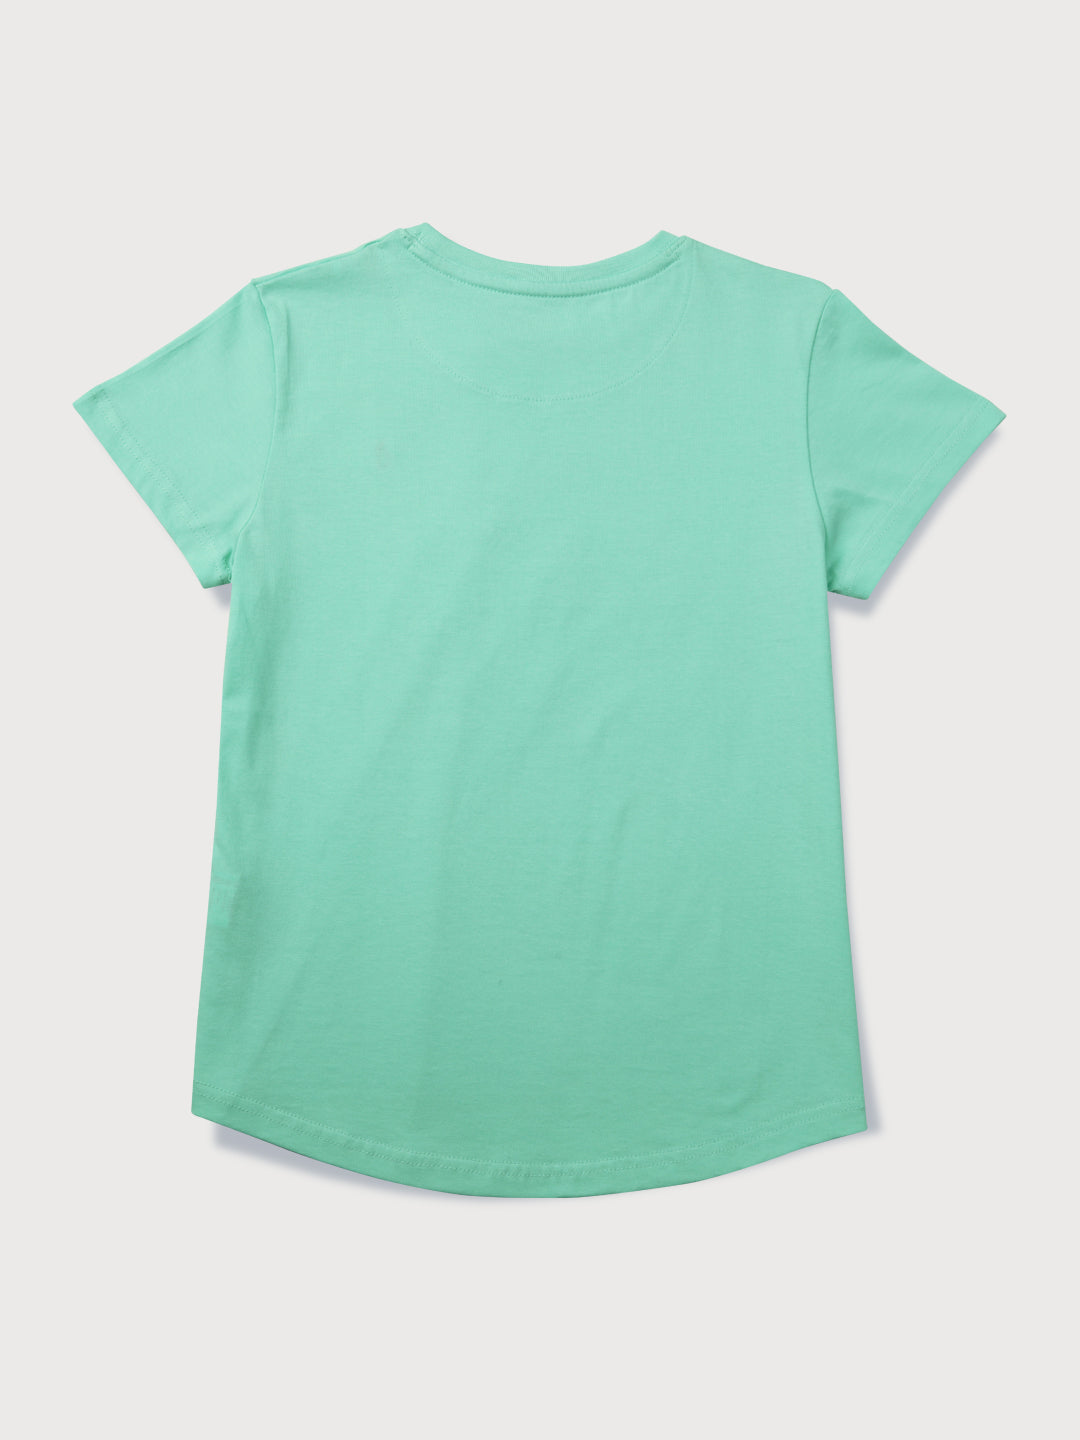 Girls Green Solid Knits Knits Top